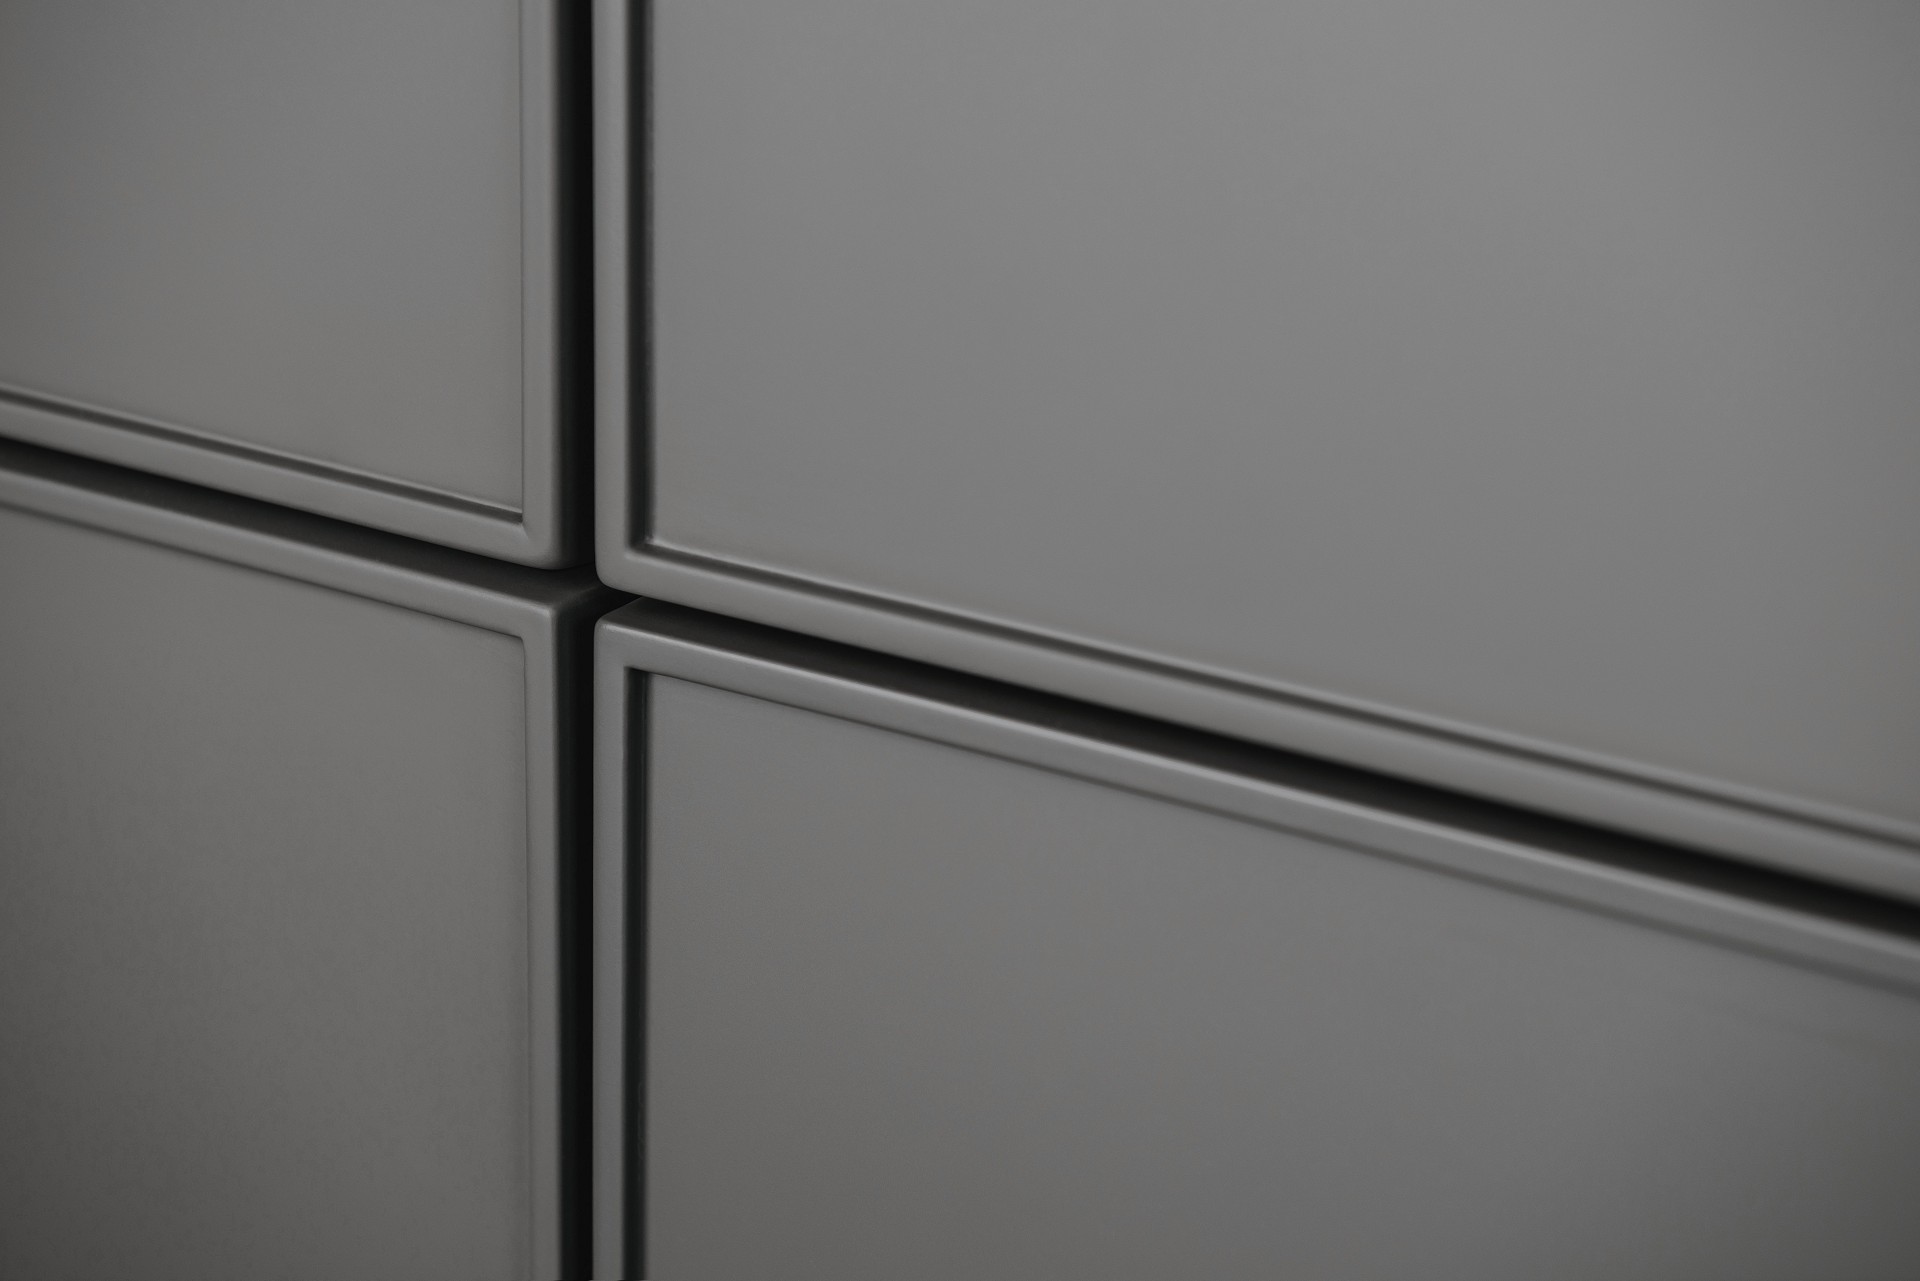 SieMatic Pure SE 3003 R with 6.5 mm edged door fronts in matte lacquer for timelessly elegant kitchen design